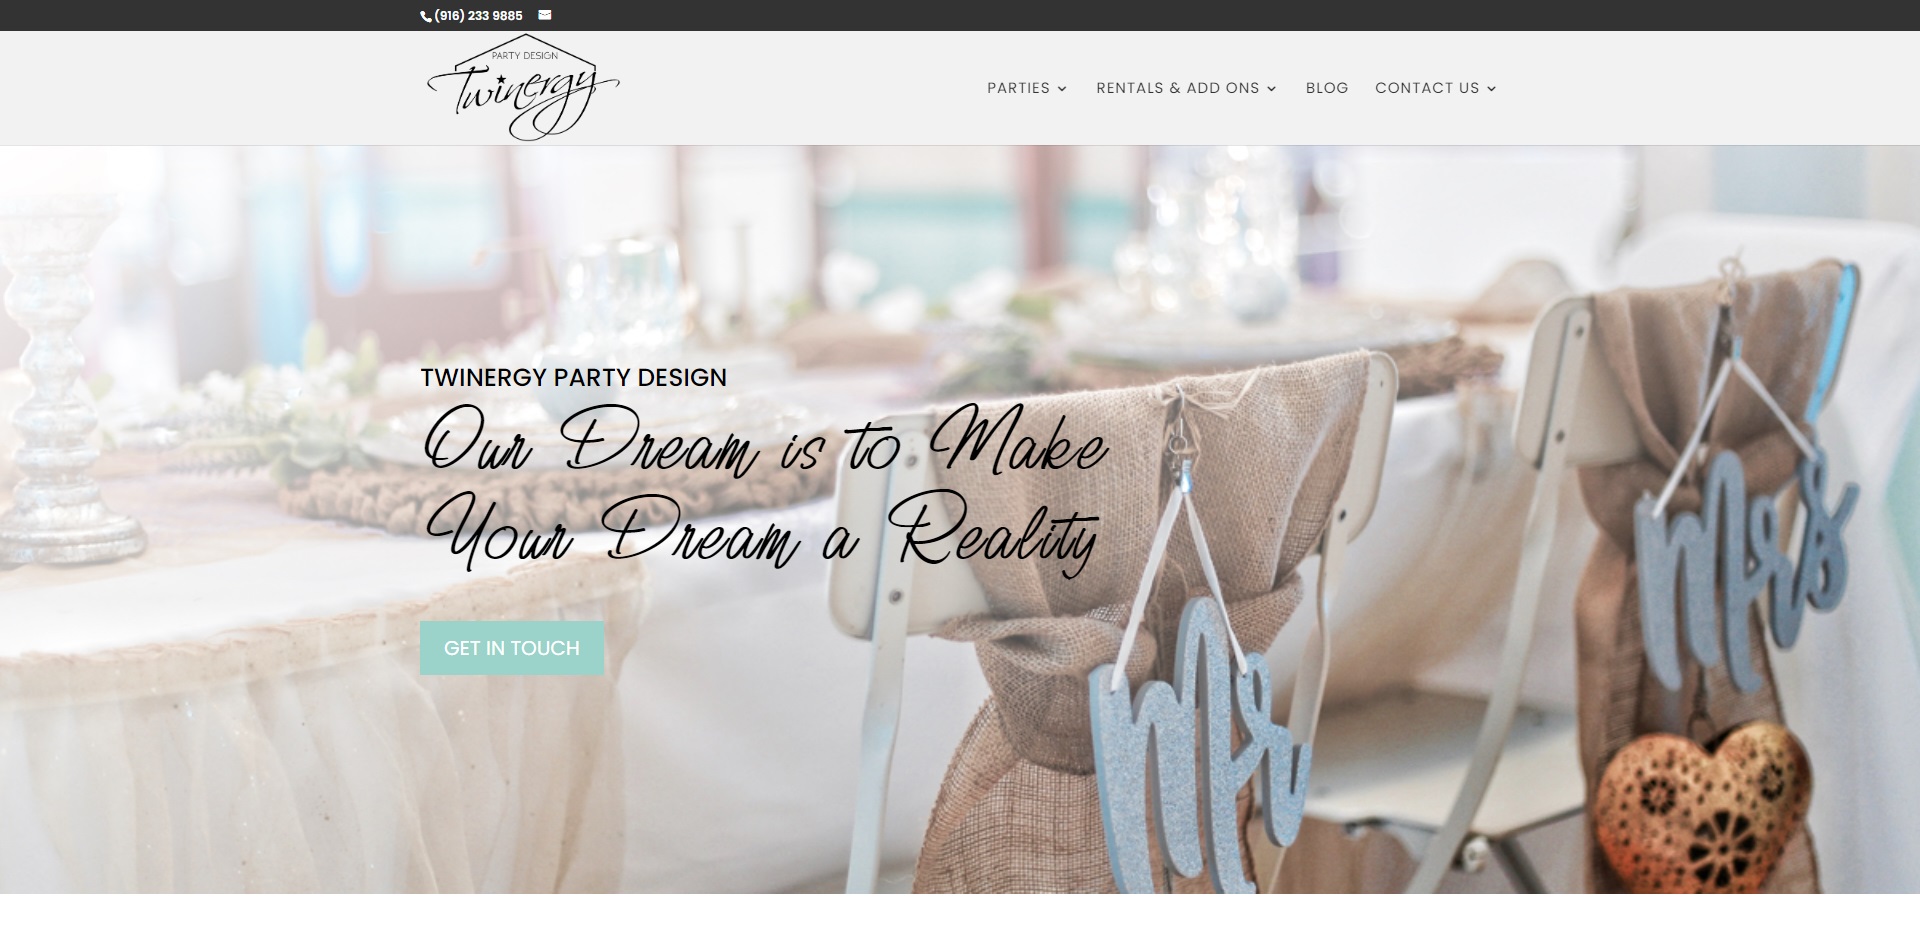 Best Party Planners in Long Beach, CA